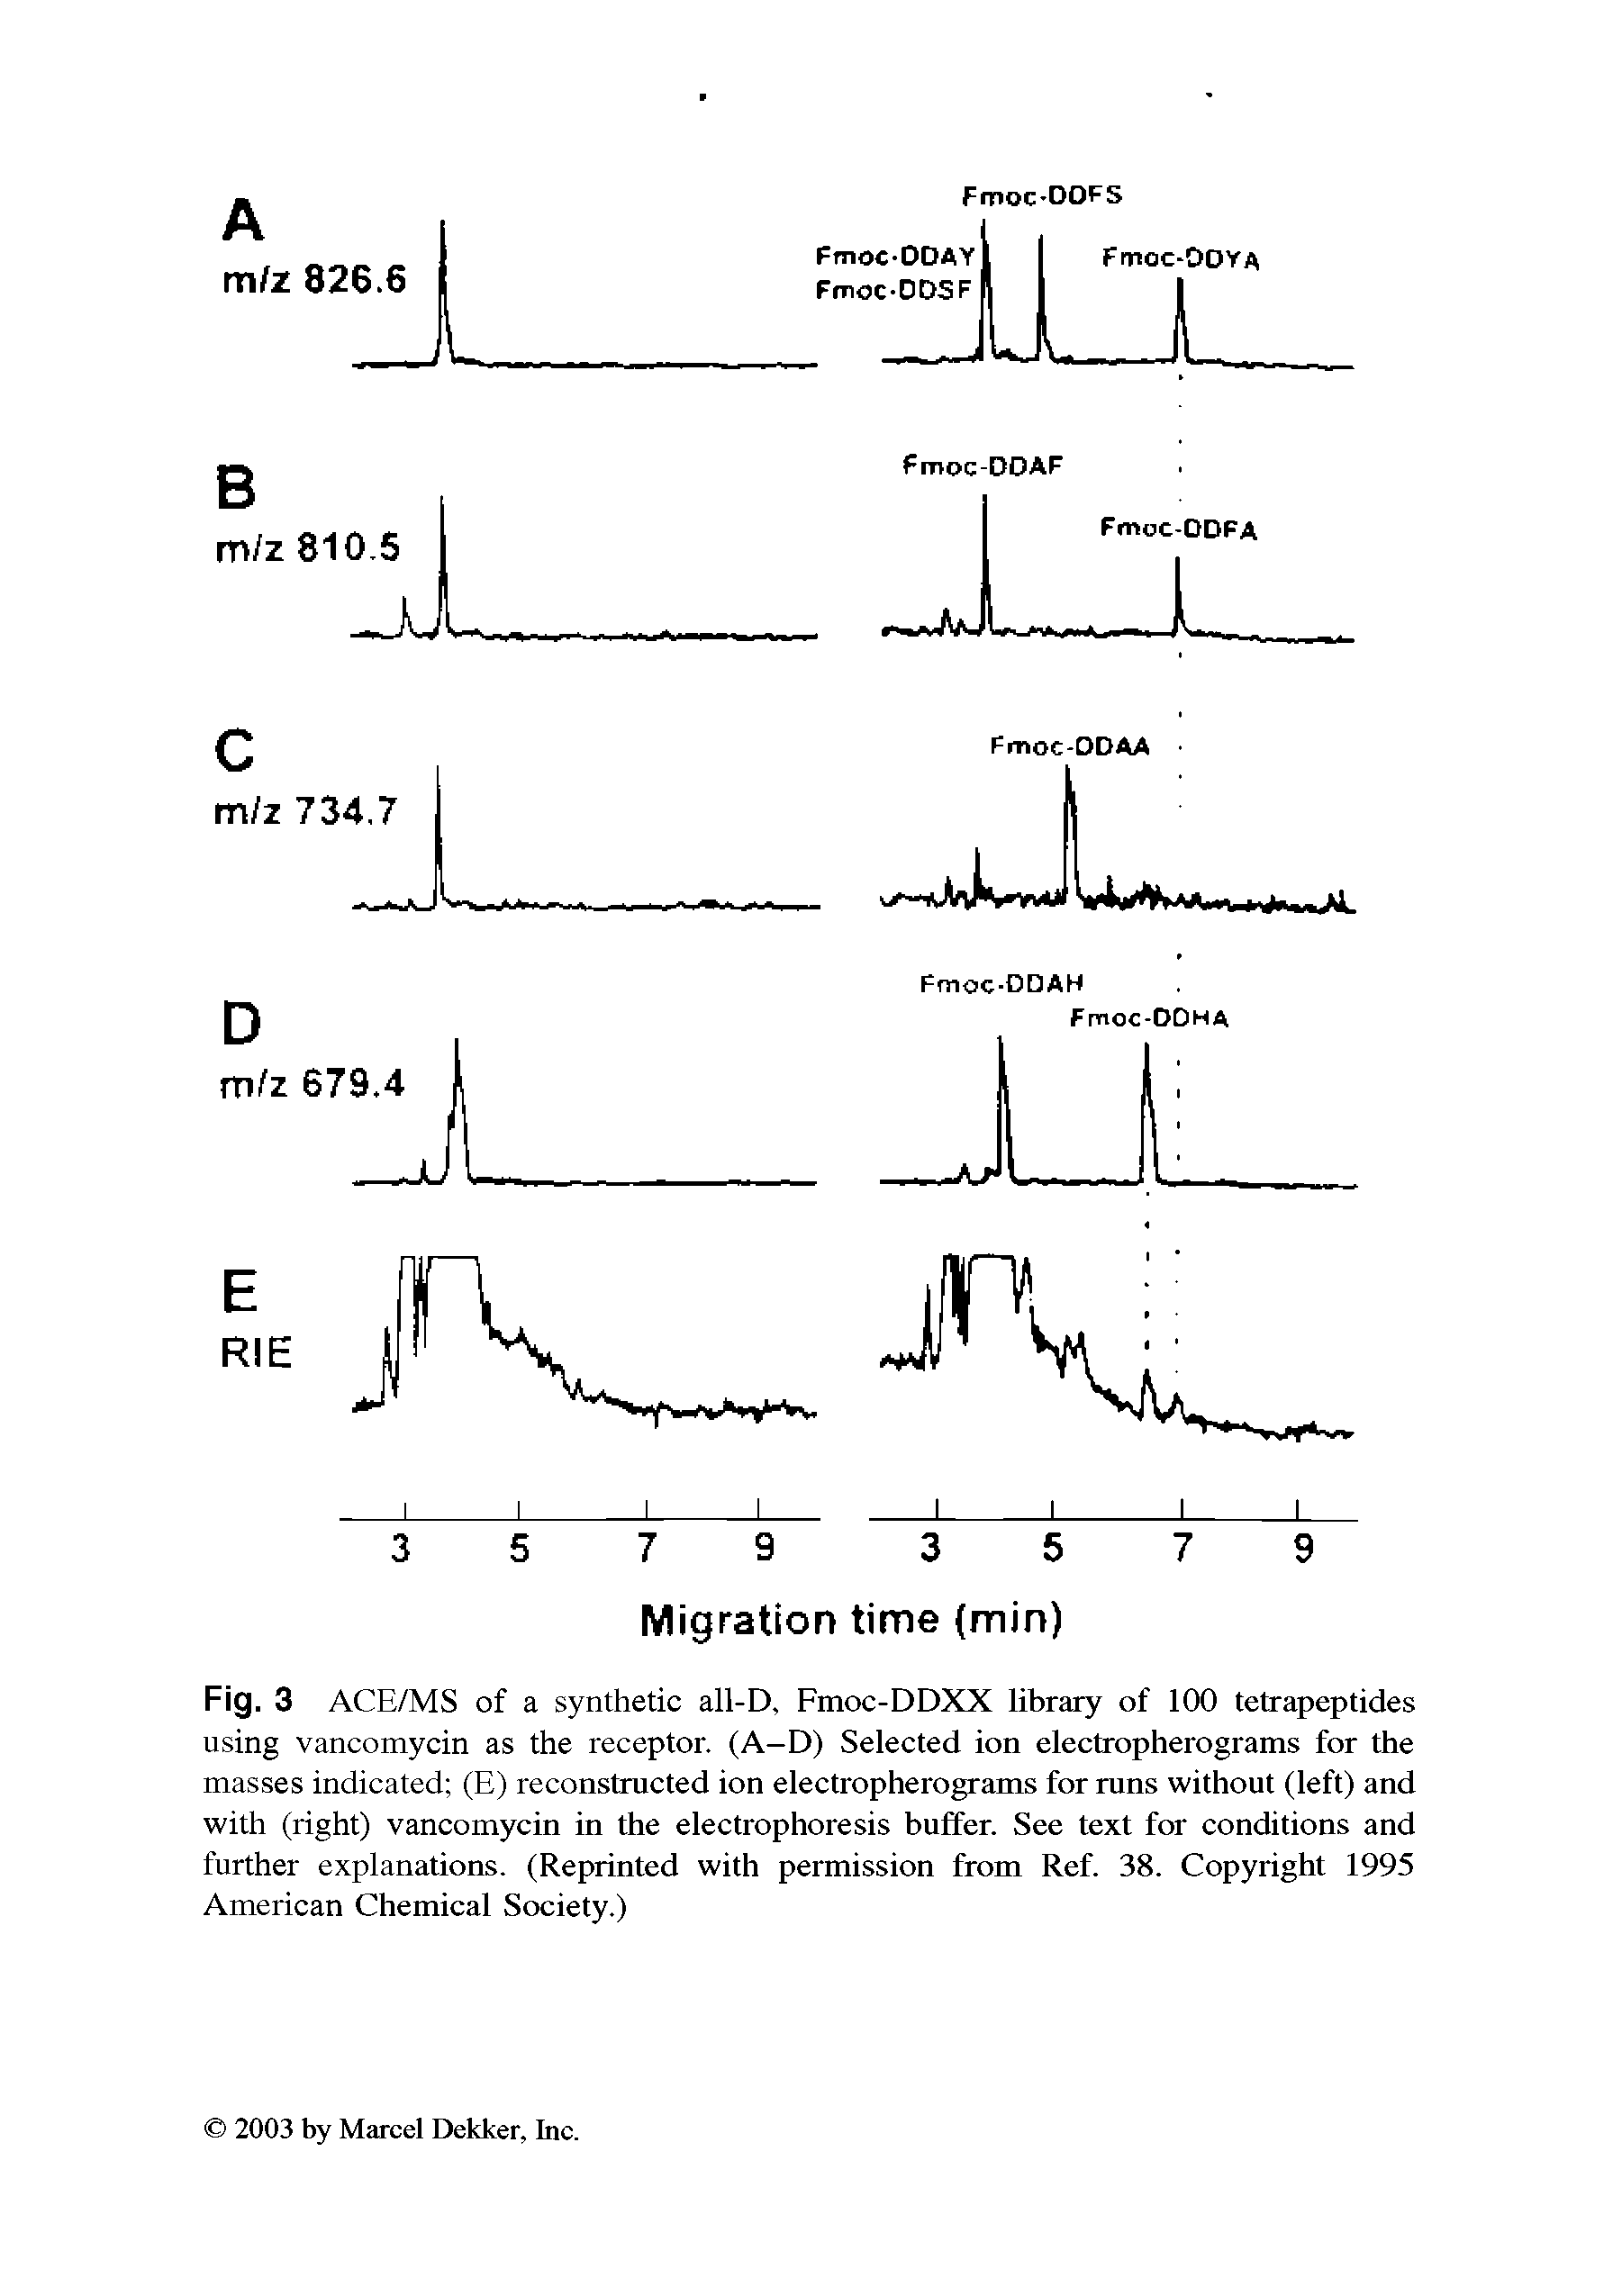 Fig. 3 ACE/MS of a synthetic all-D, Fmoc-DDXX library of 100 tetrapeptides using vancomycin as the receptor. (A-D) Selected ion electropherograms for the masses indicated (E) reconstructed ion electropherograms for runs without (left) and with (right) vancomycin in the electrophoresis buffer. See text for conditions and further explanations. (Reprinted with permission from Ref. 38. Copyright 1995 American Chemical Society.)...